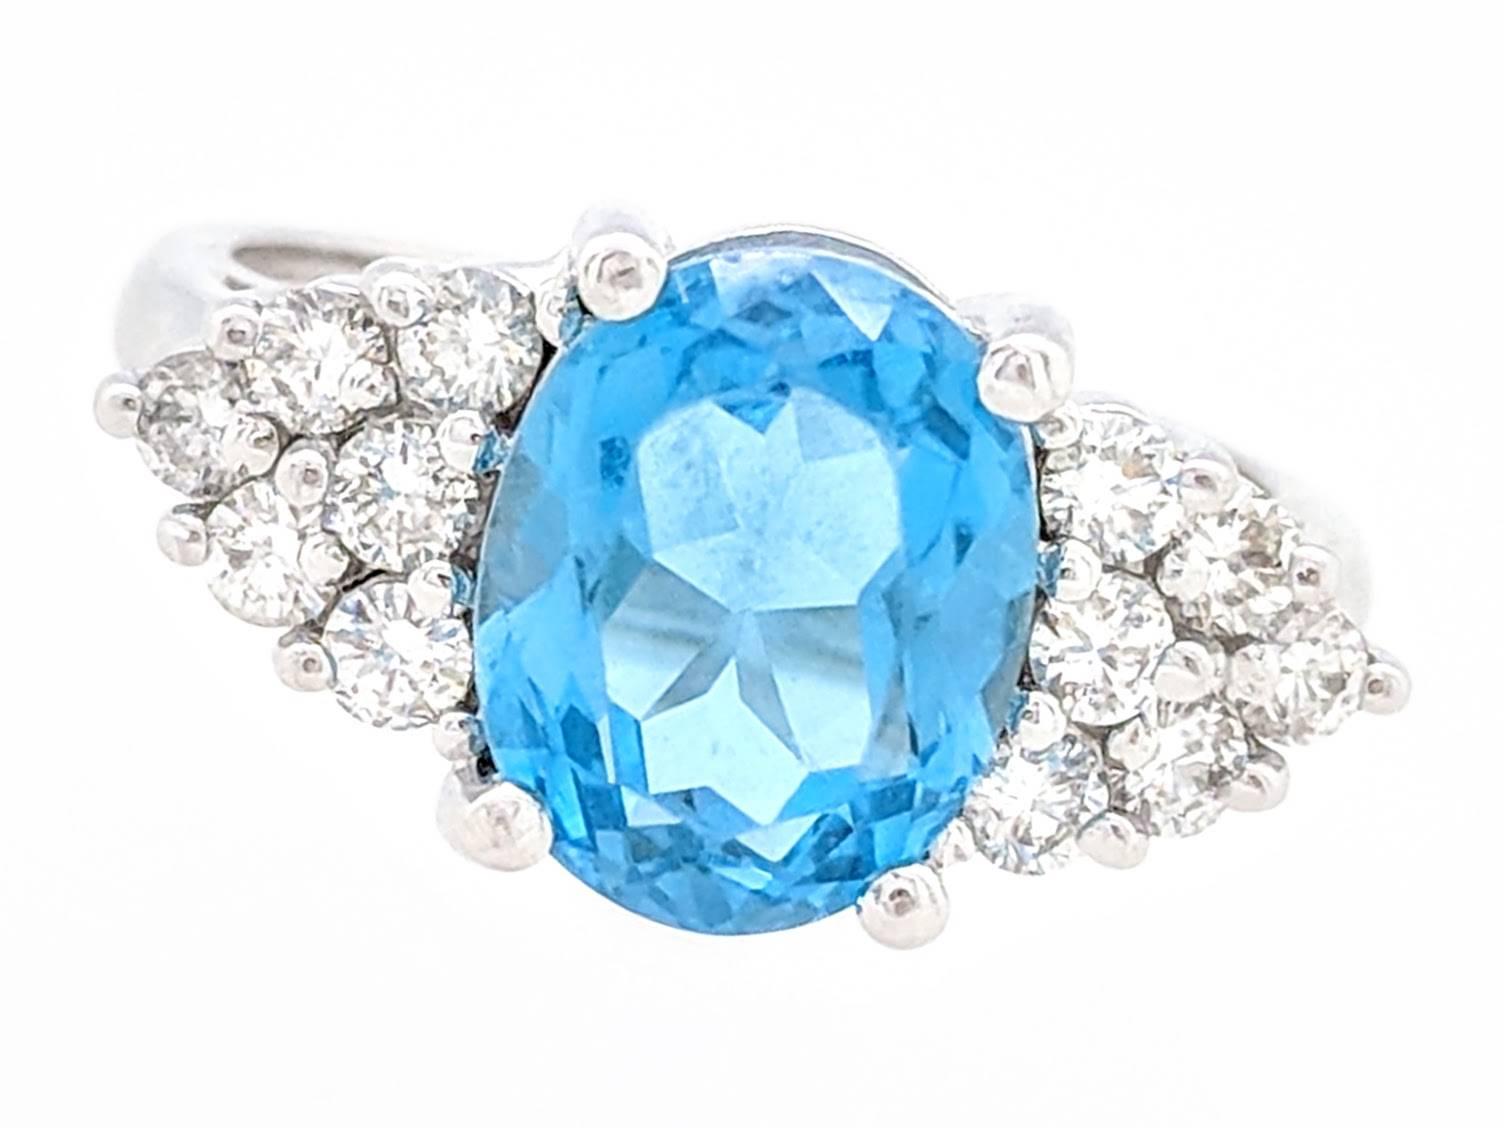 Contemporary 14 Karat White Gold 3.50 Carat Blue Topaz and Diamond Cocktail Ring For Sale